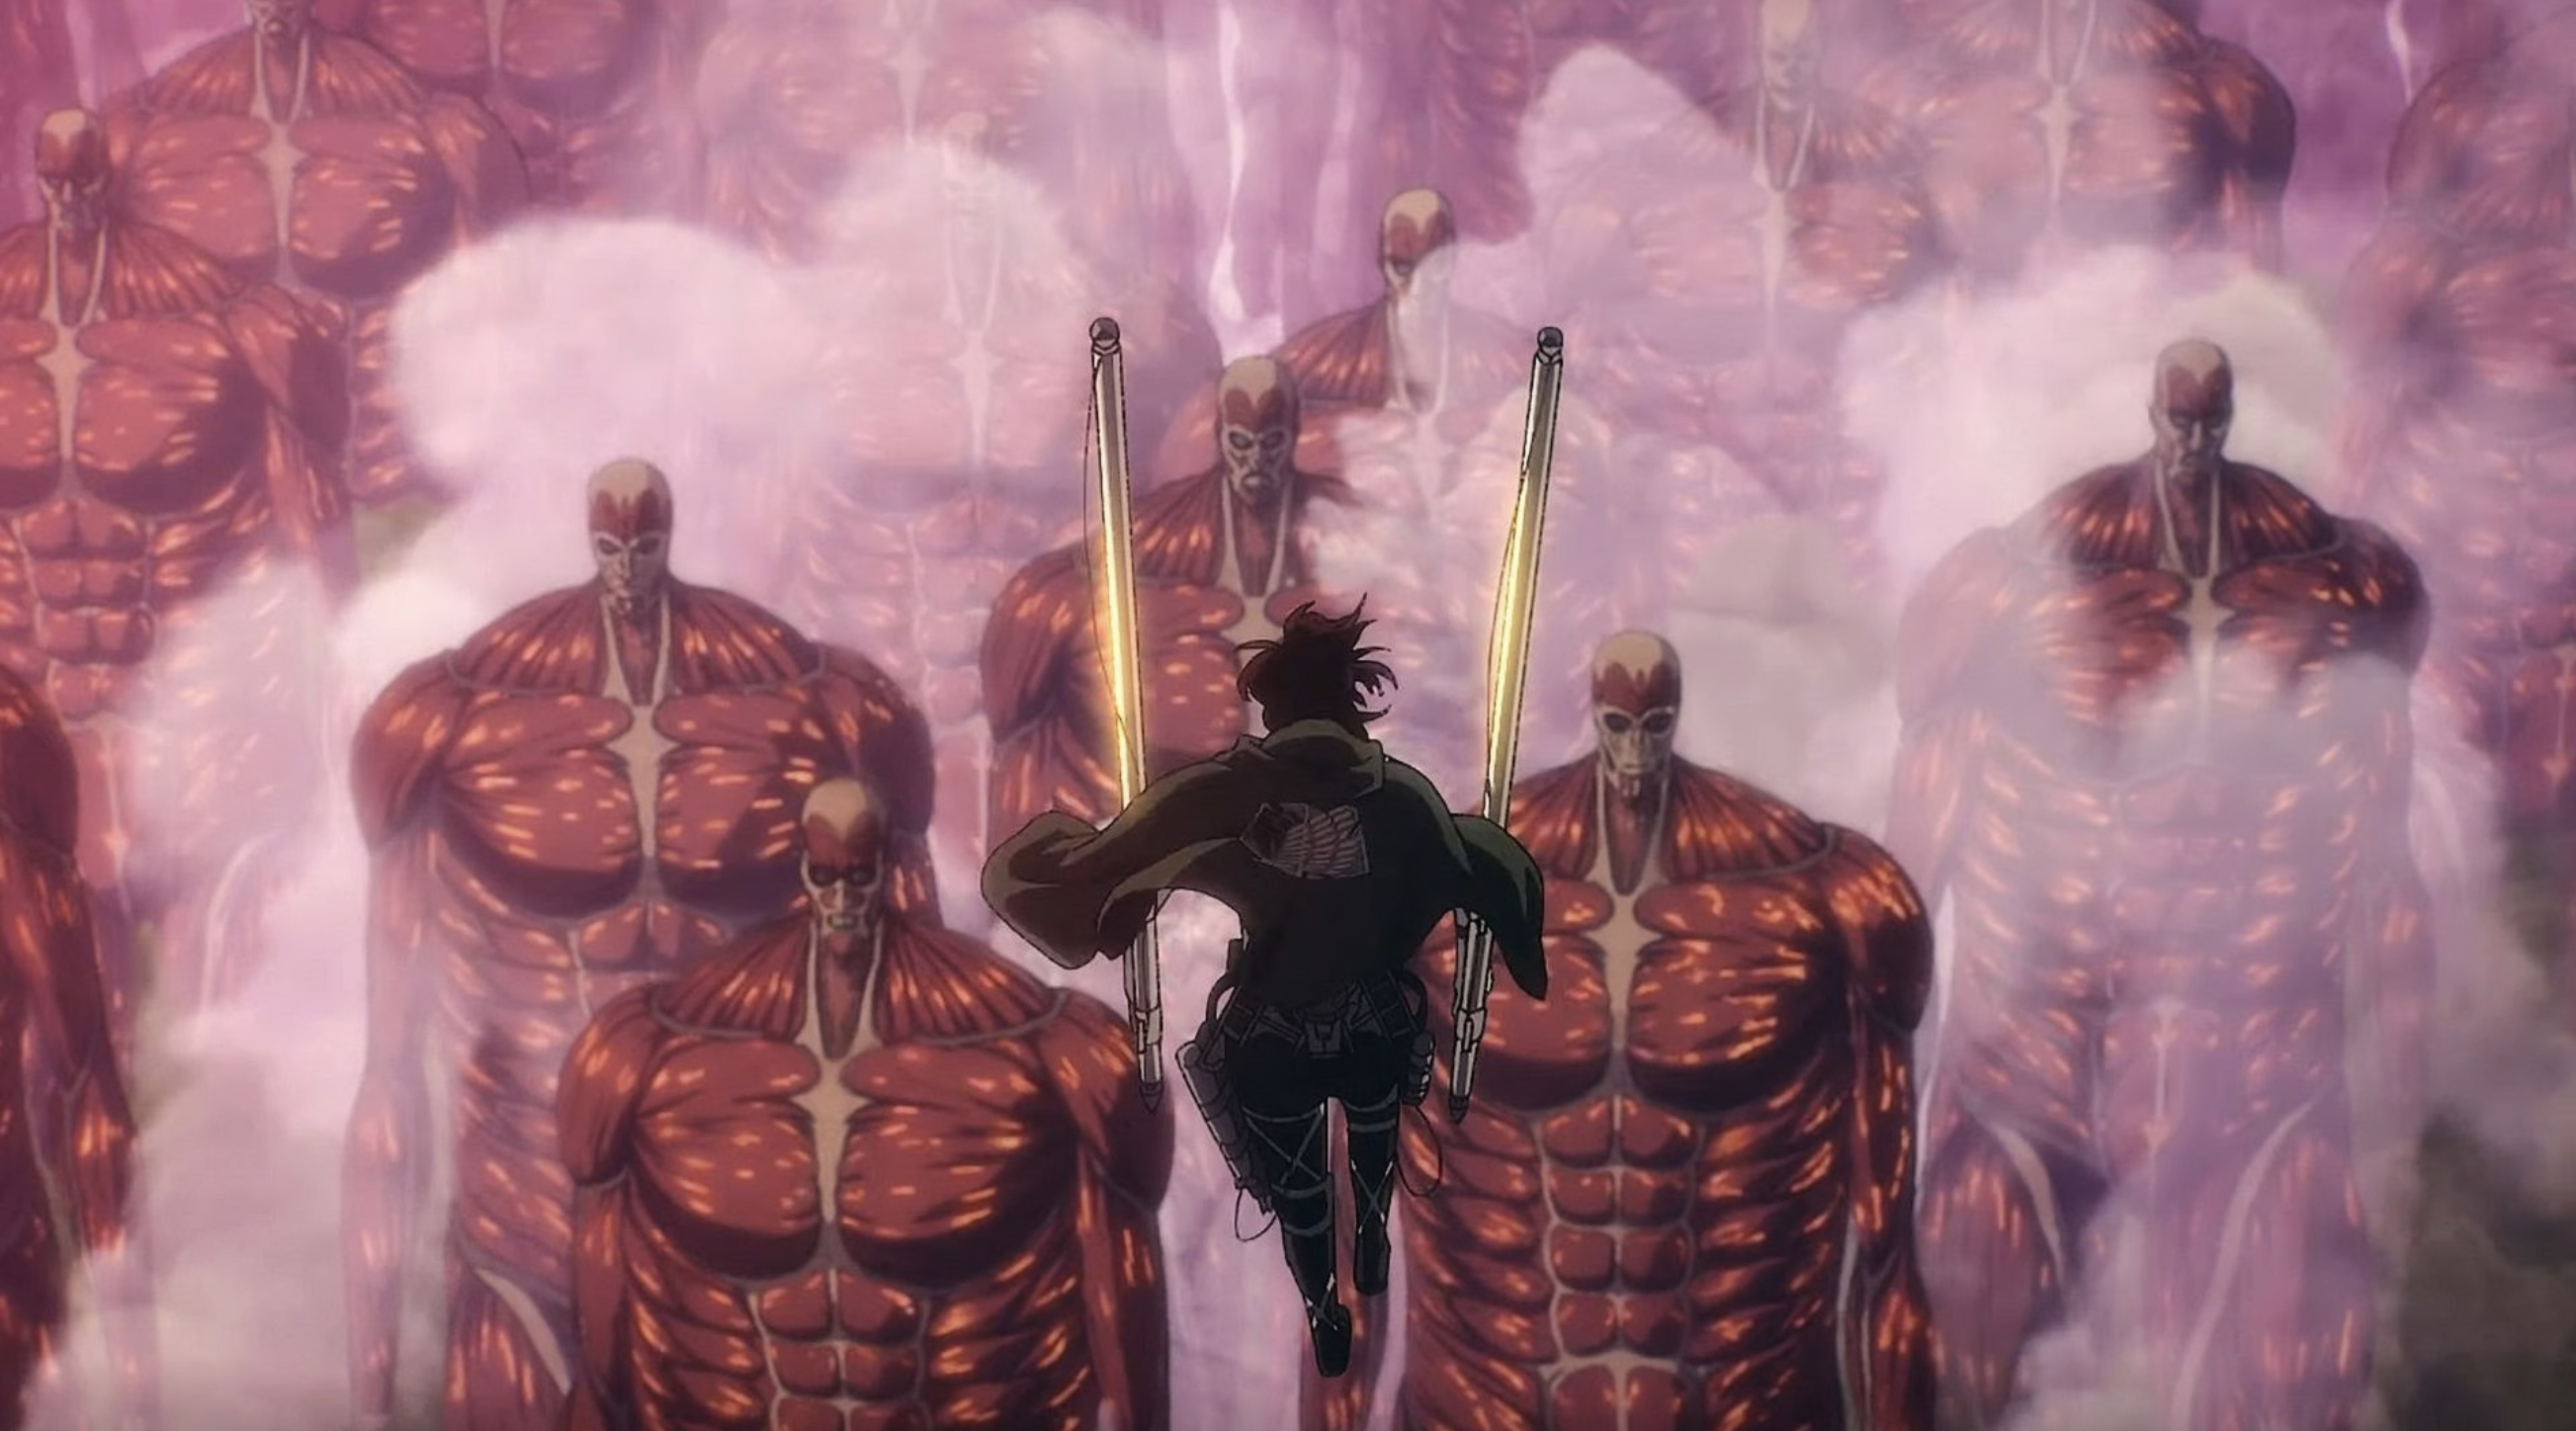 Attack on Titan The Final Season Episode 1 Becomes The Most Viewed